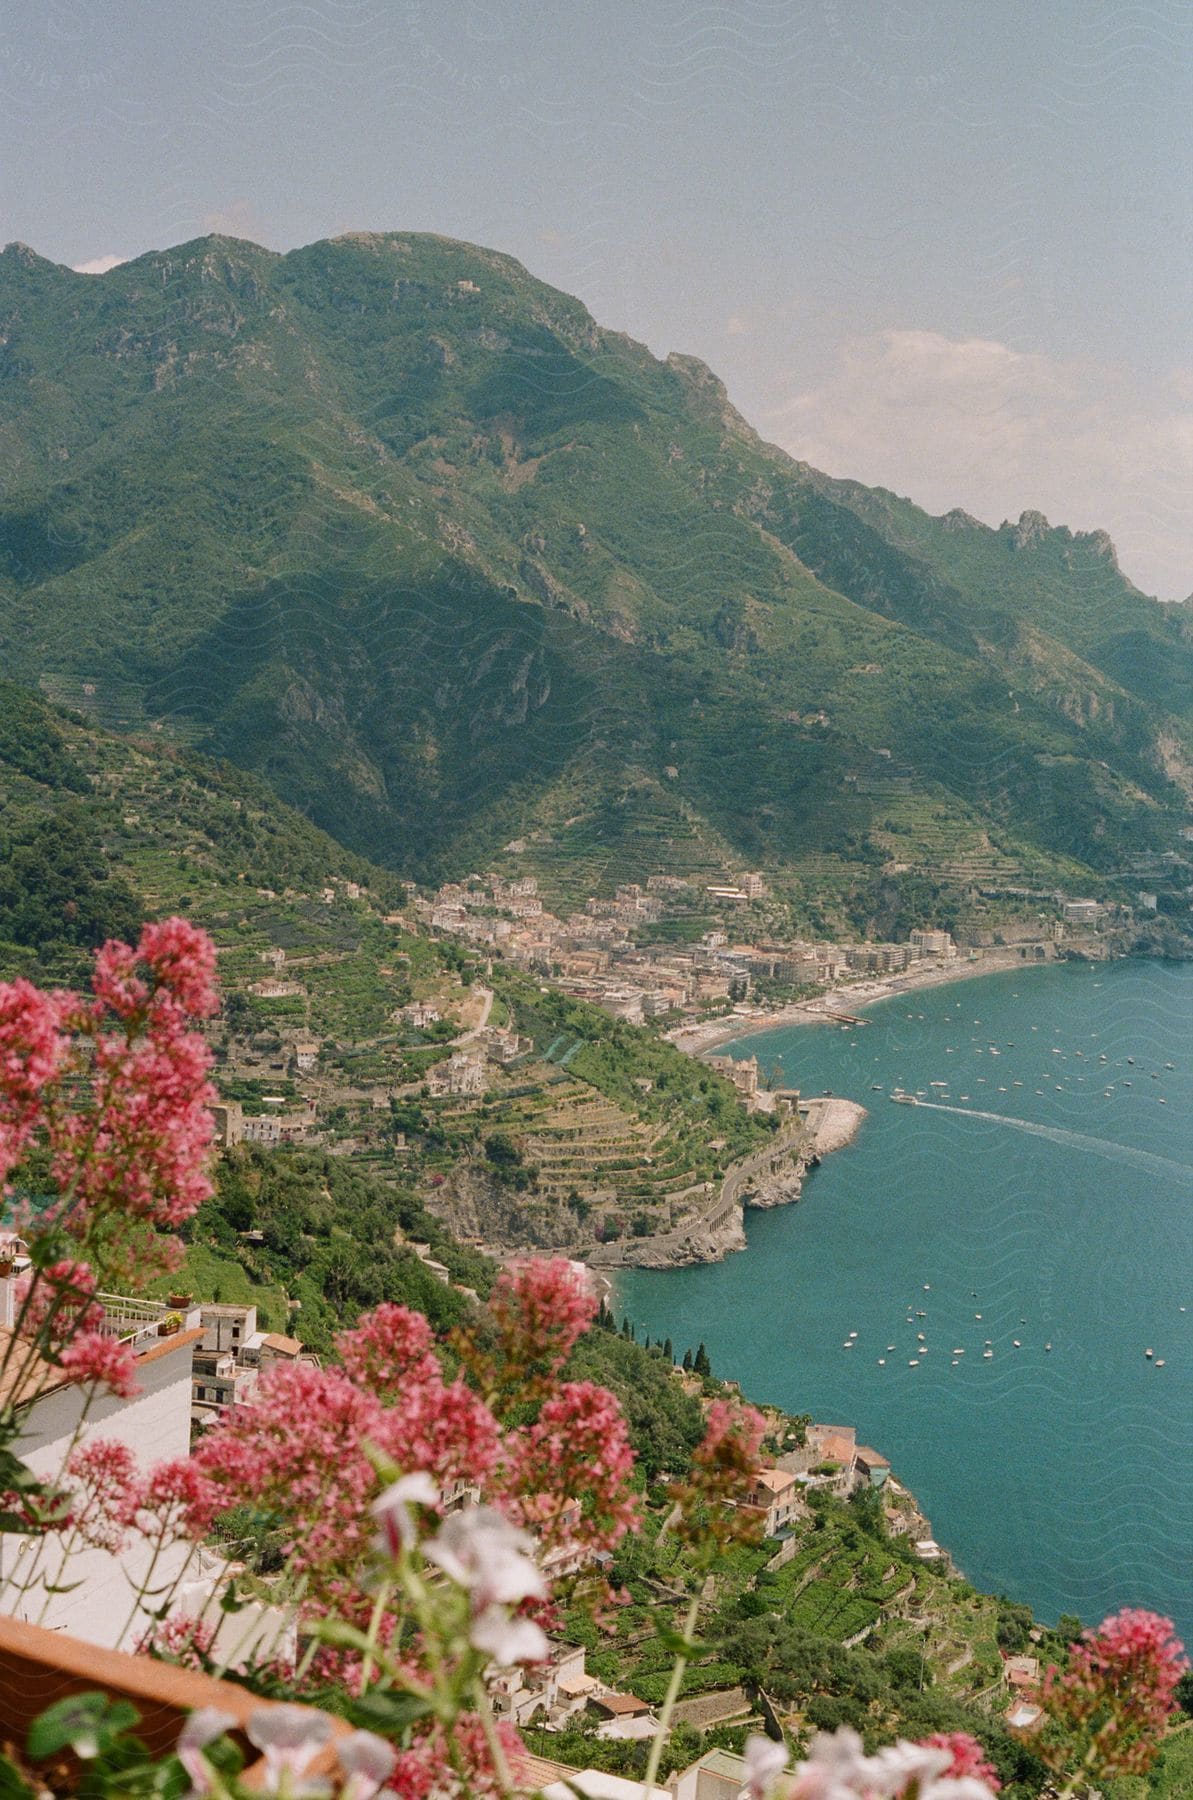 Panoramic view of a coastal city with buildings along mountains and a blue sea in the background.